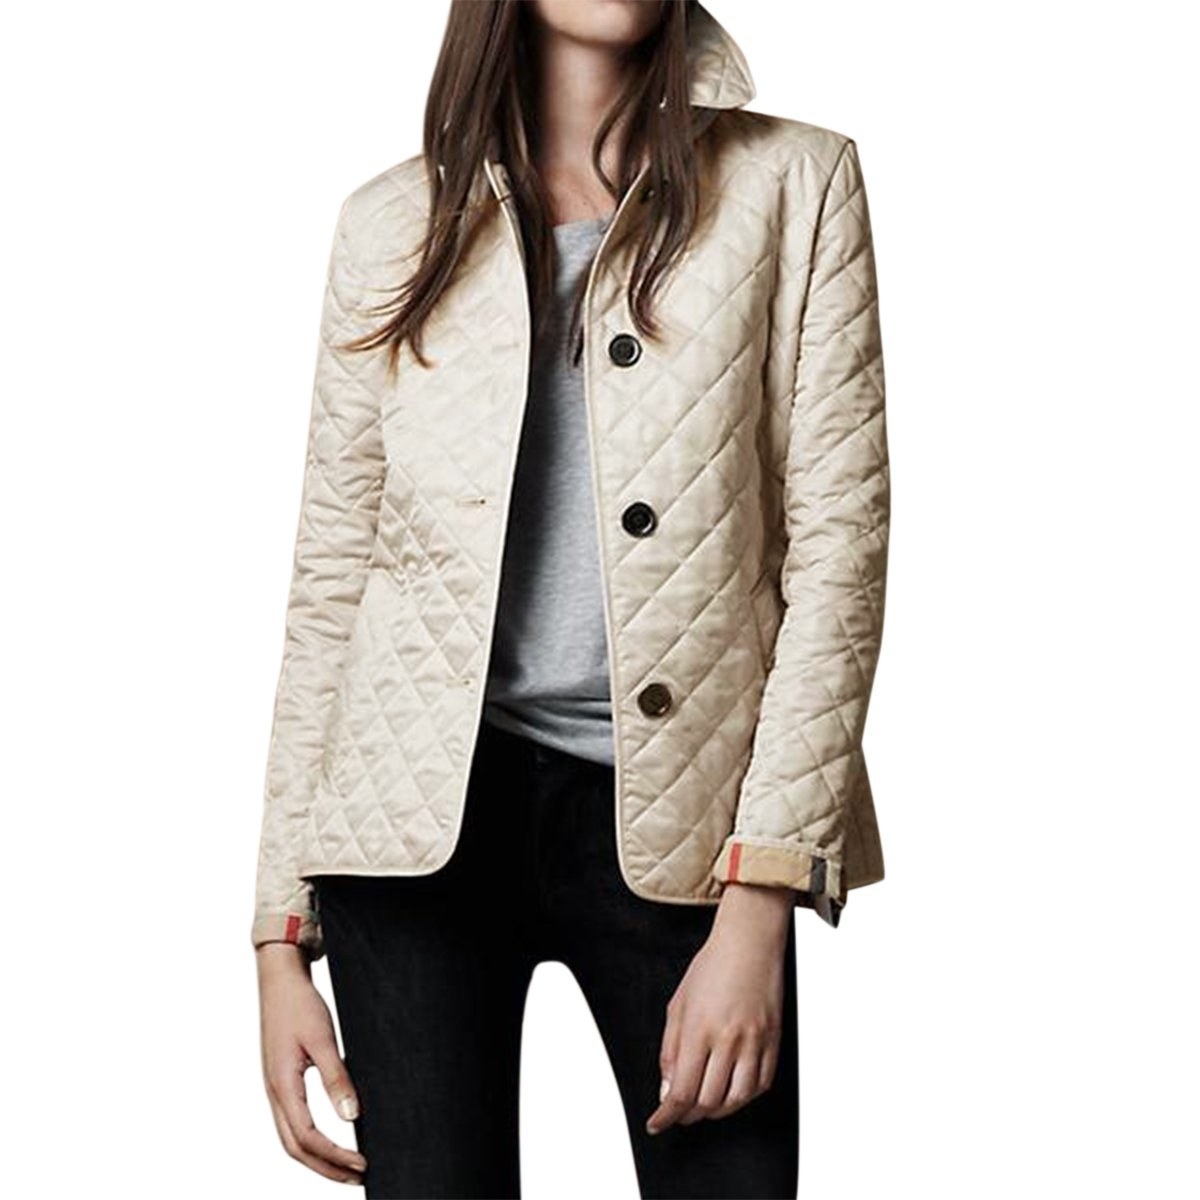 27 Light Jackets To Layer With This Spring